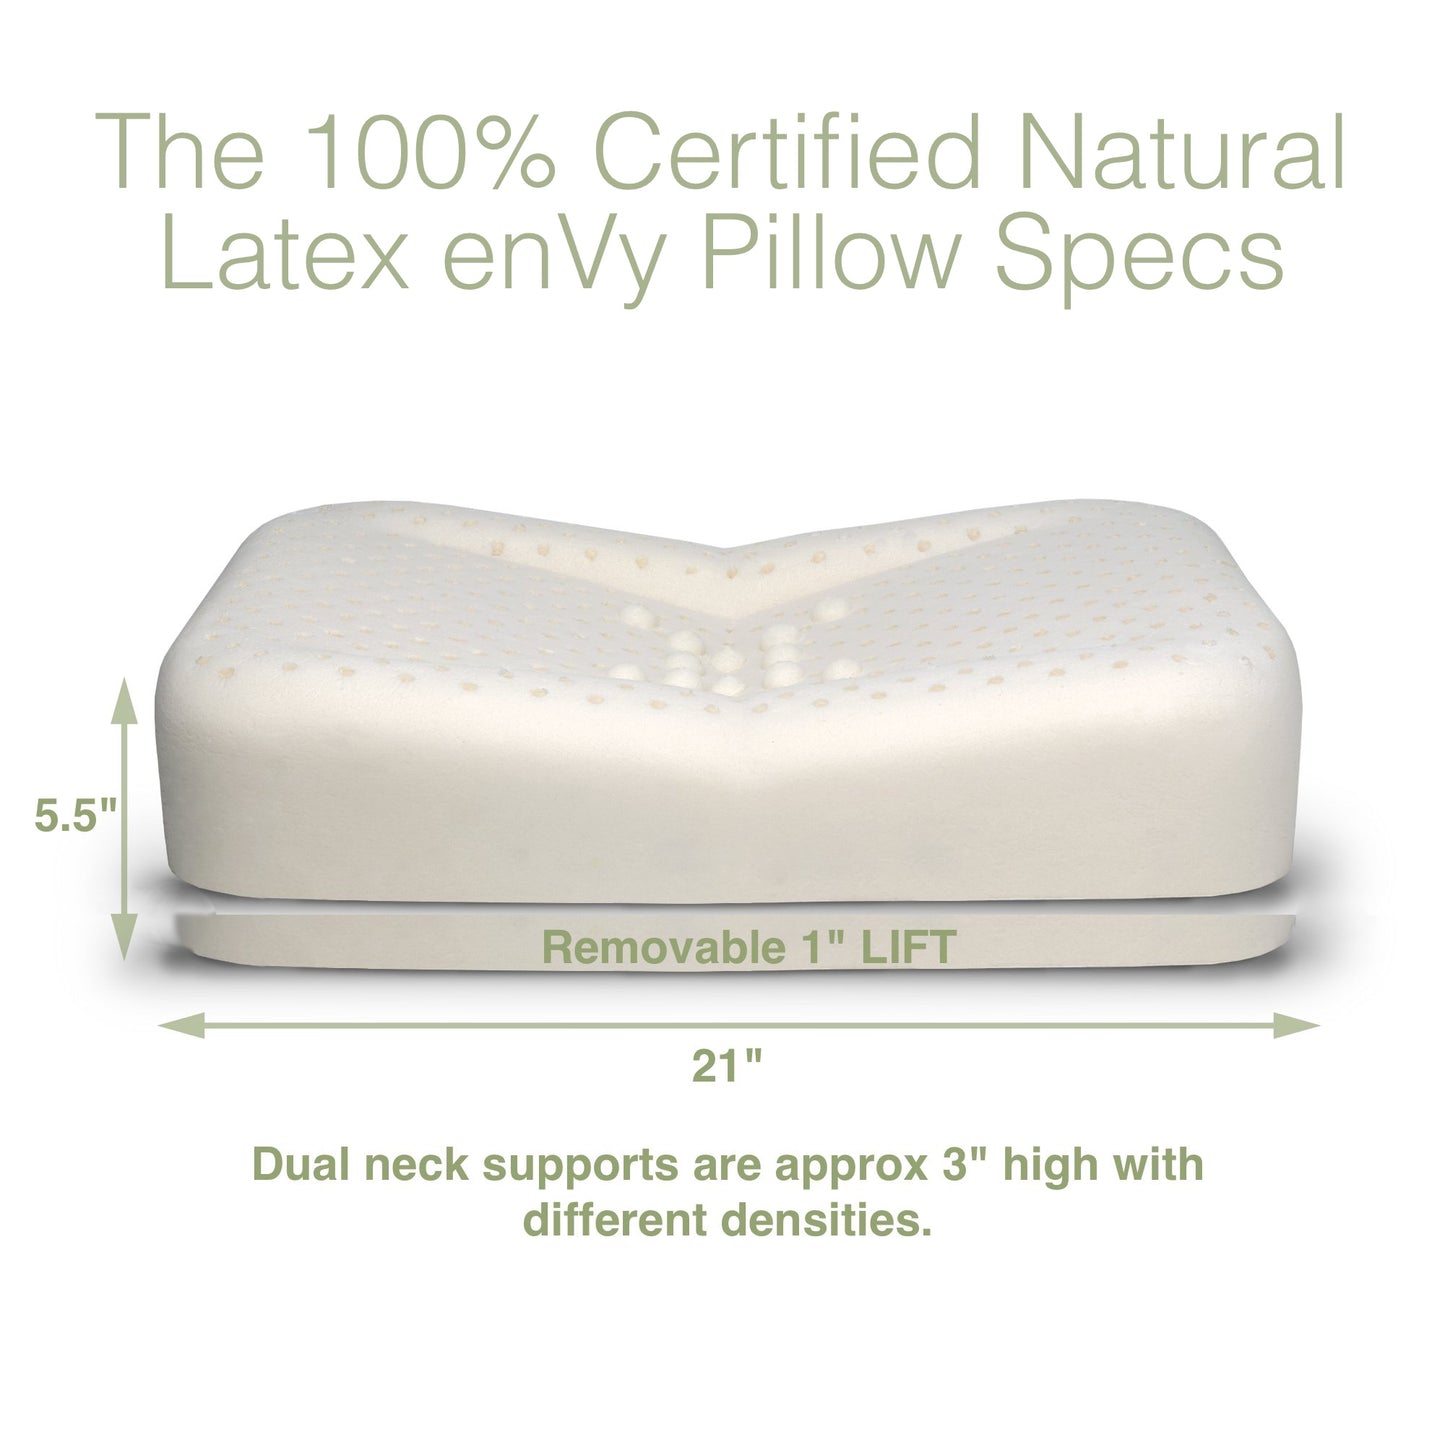 The enVy® COPPER + SILK 100% Natural Latex PROACTIVE-Aging Pillow